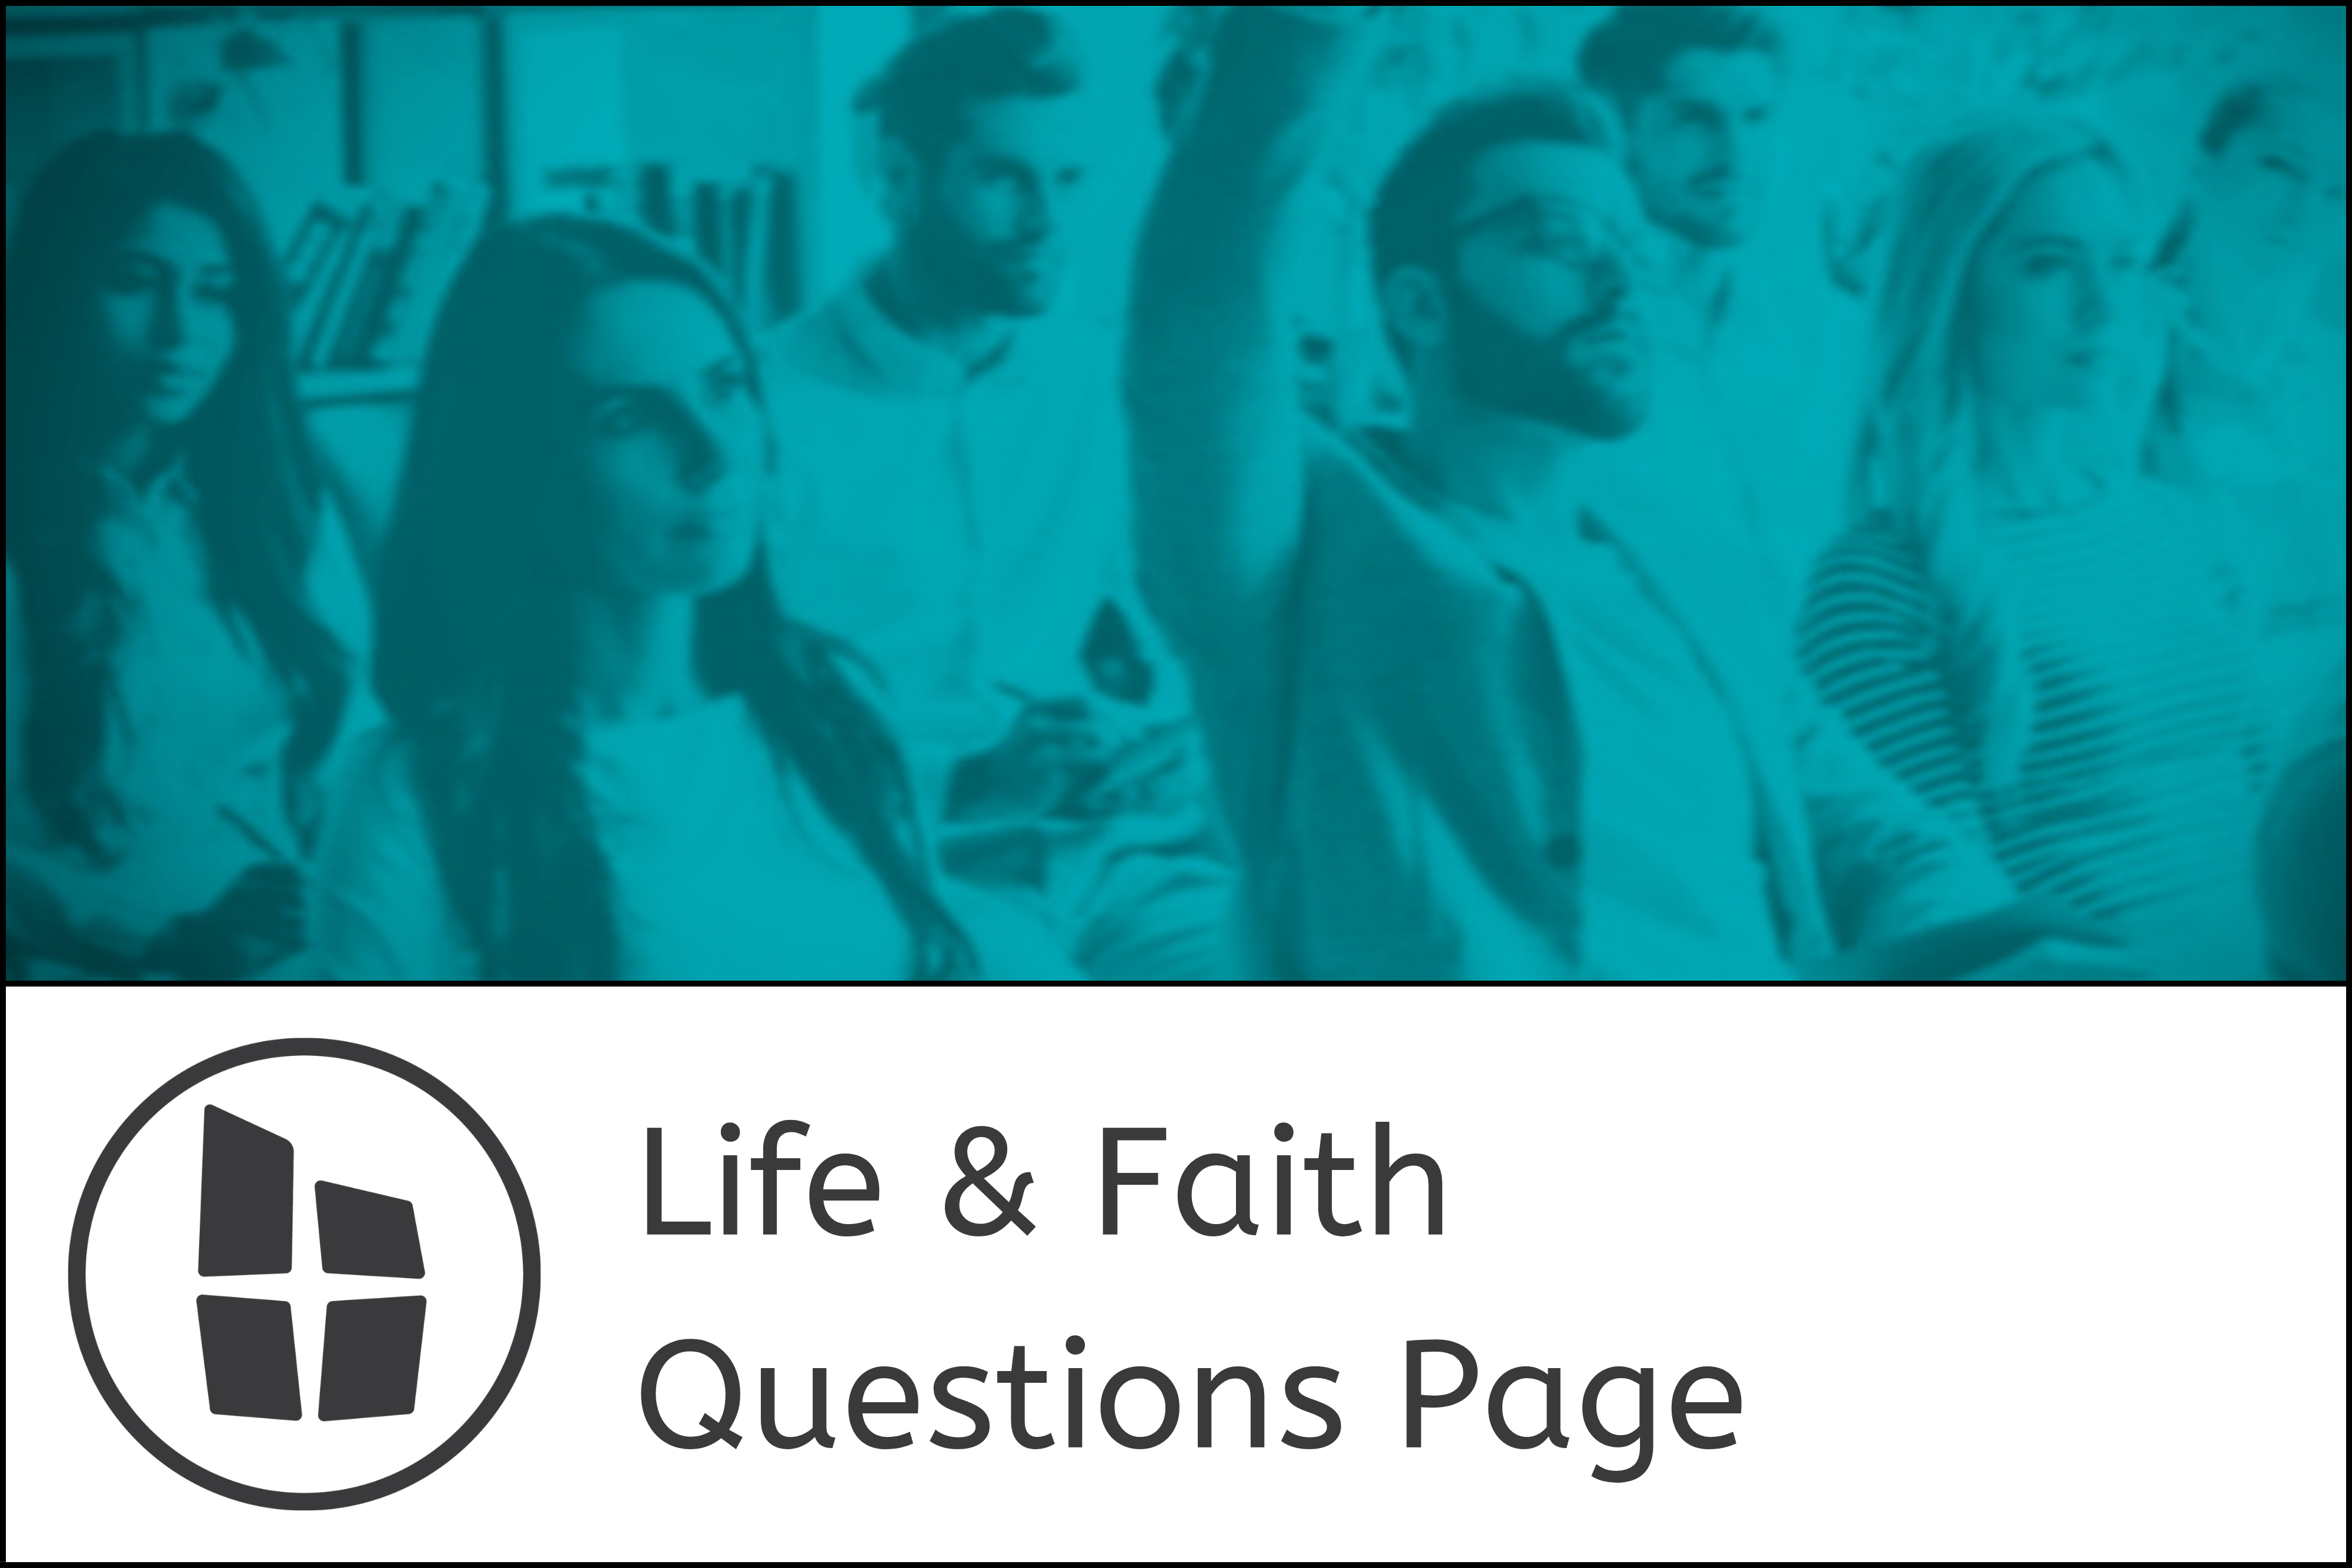 Life & Faith Questions Page